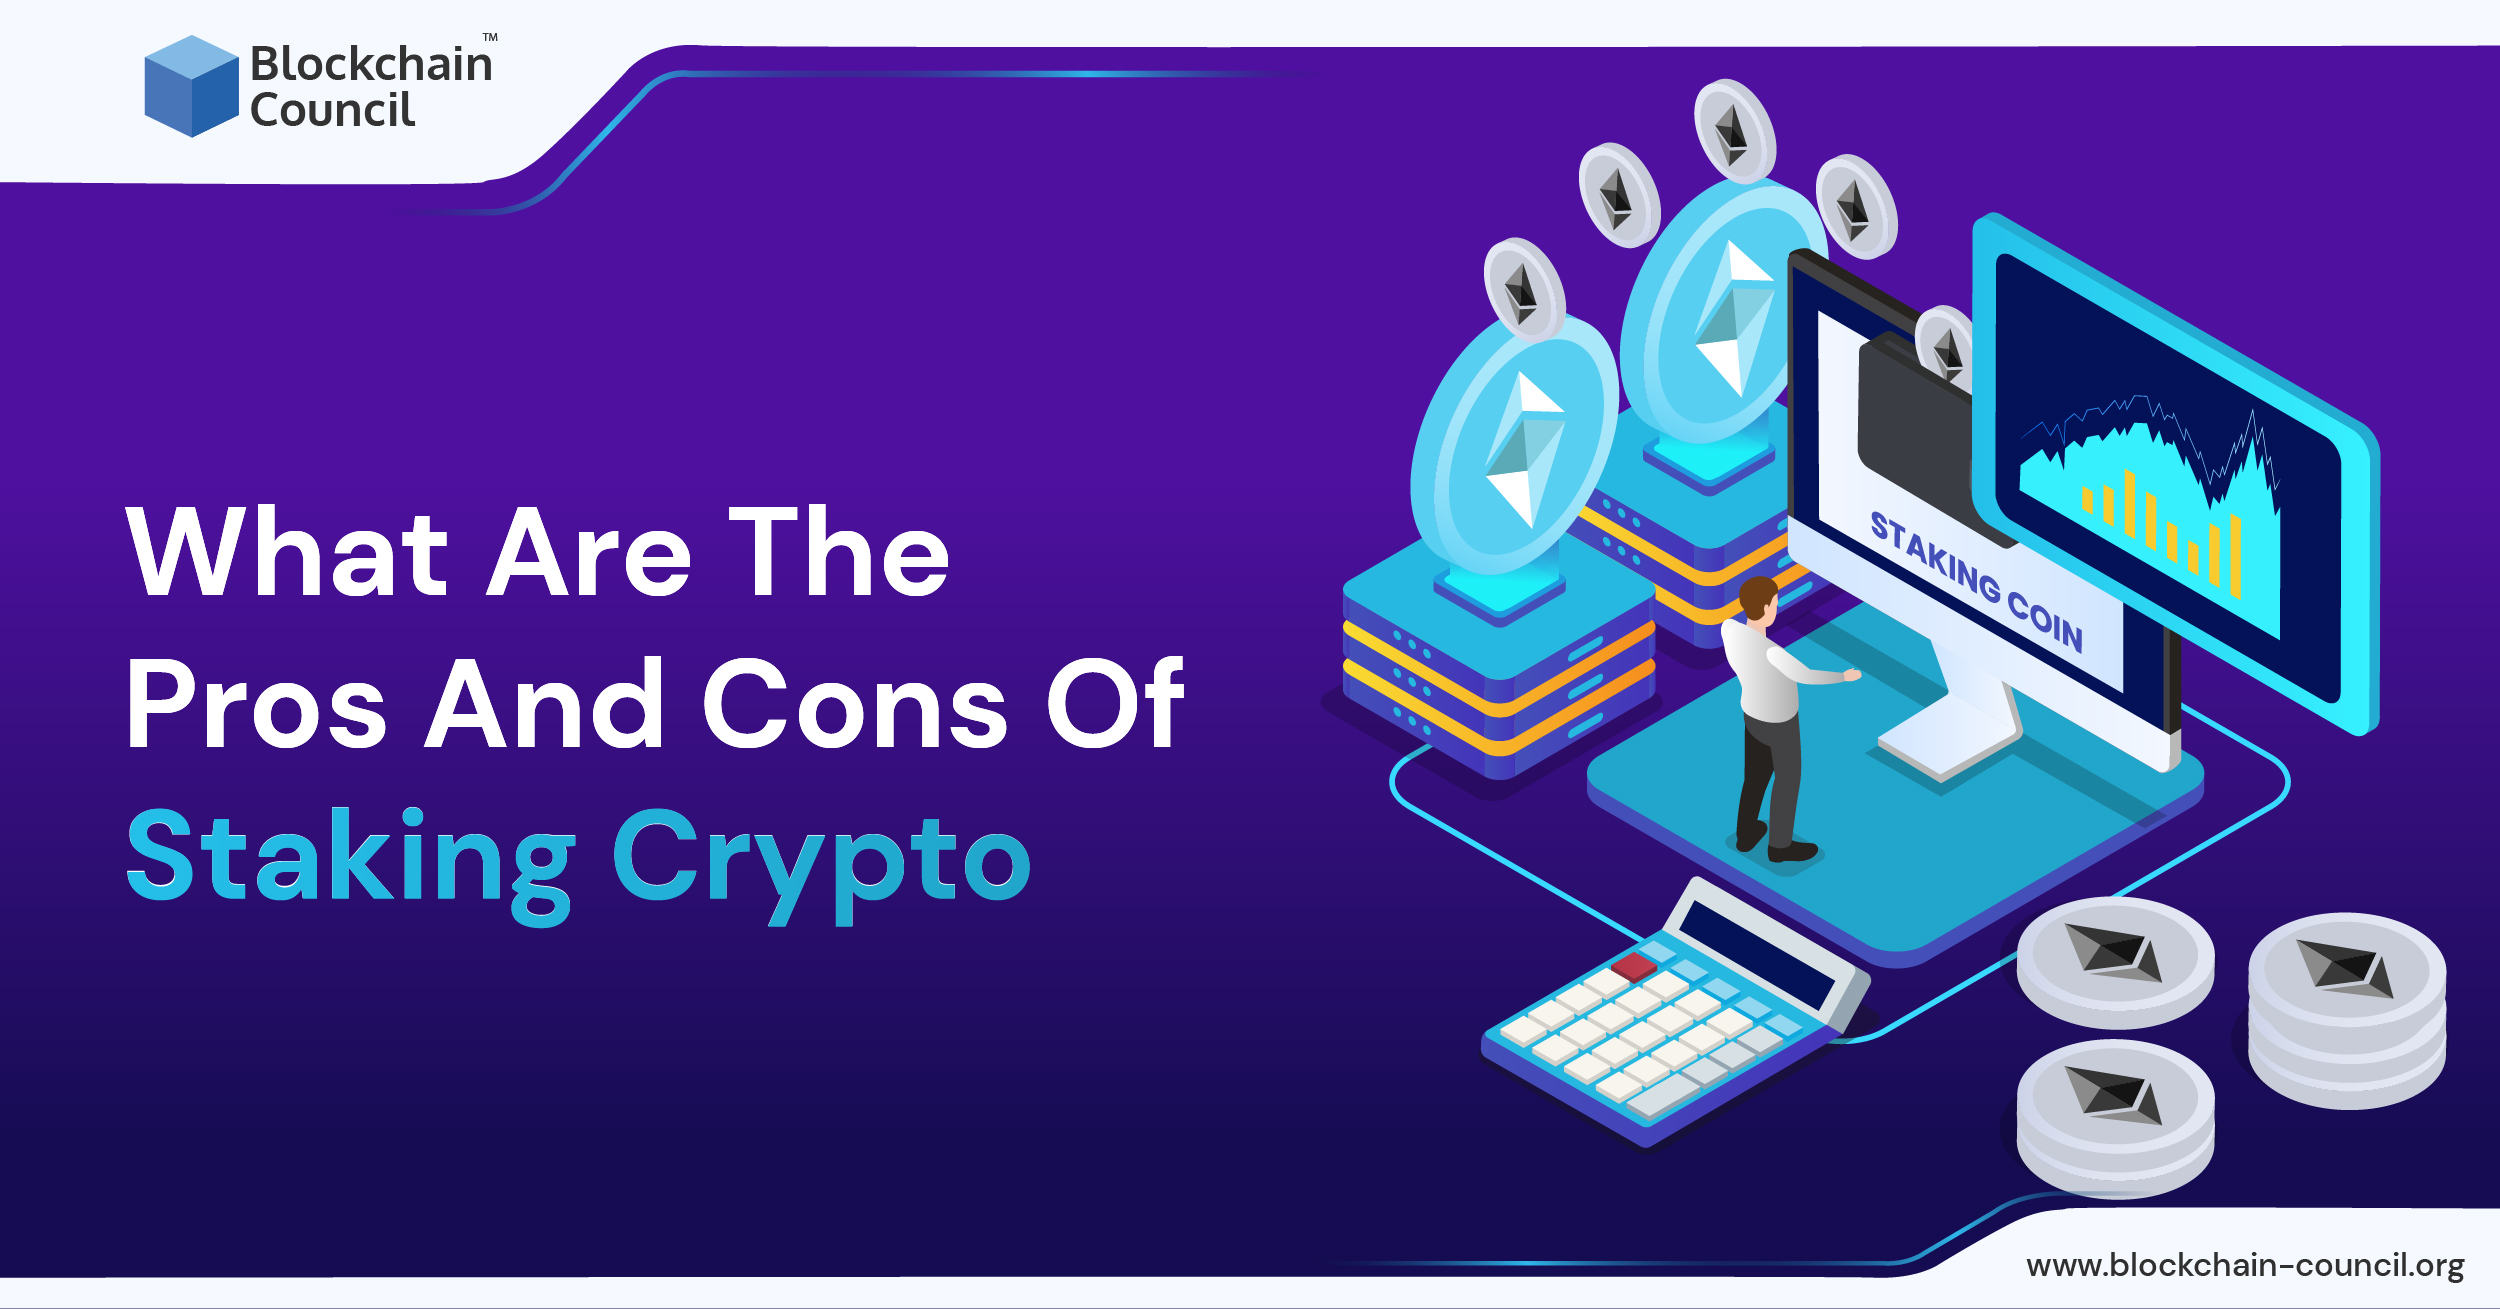 What are the pros and cons of staking crypto?